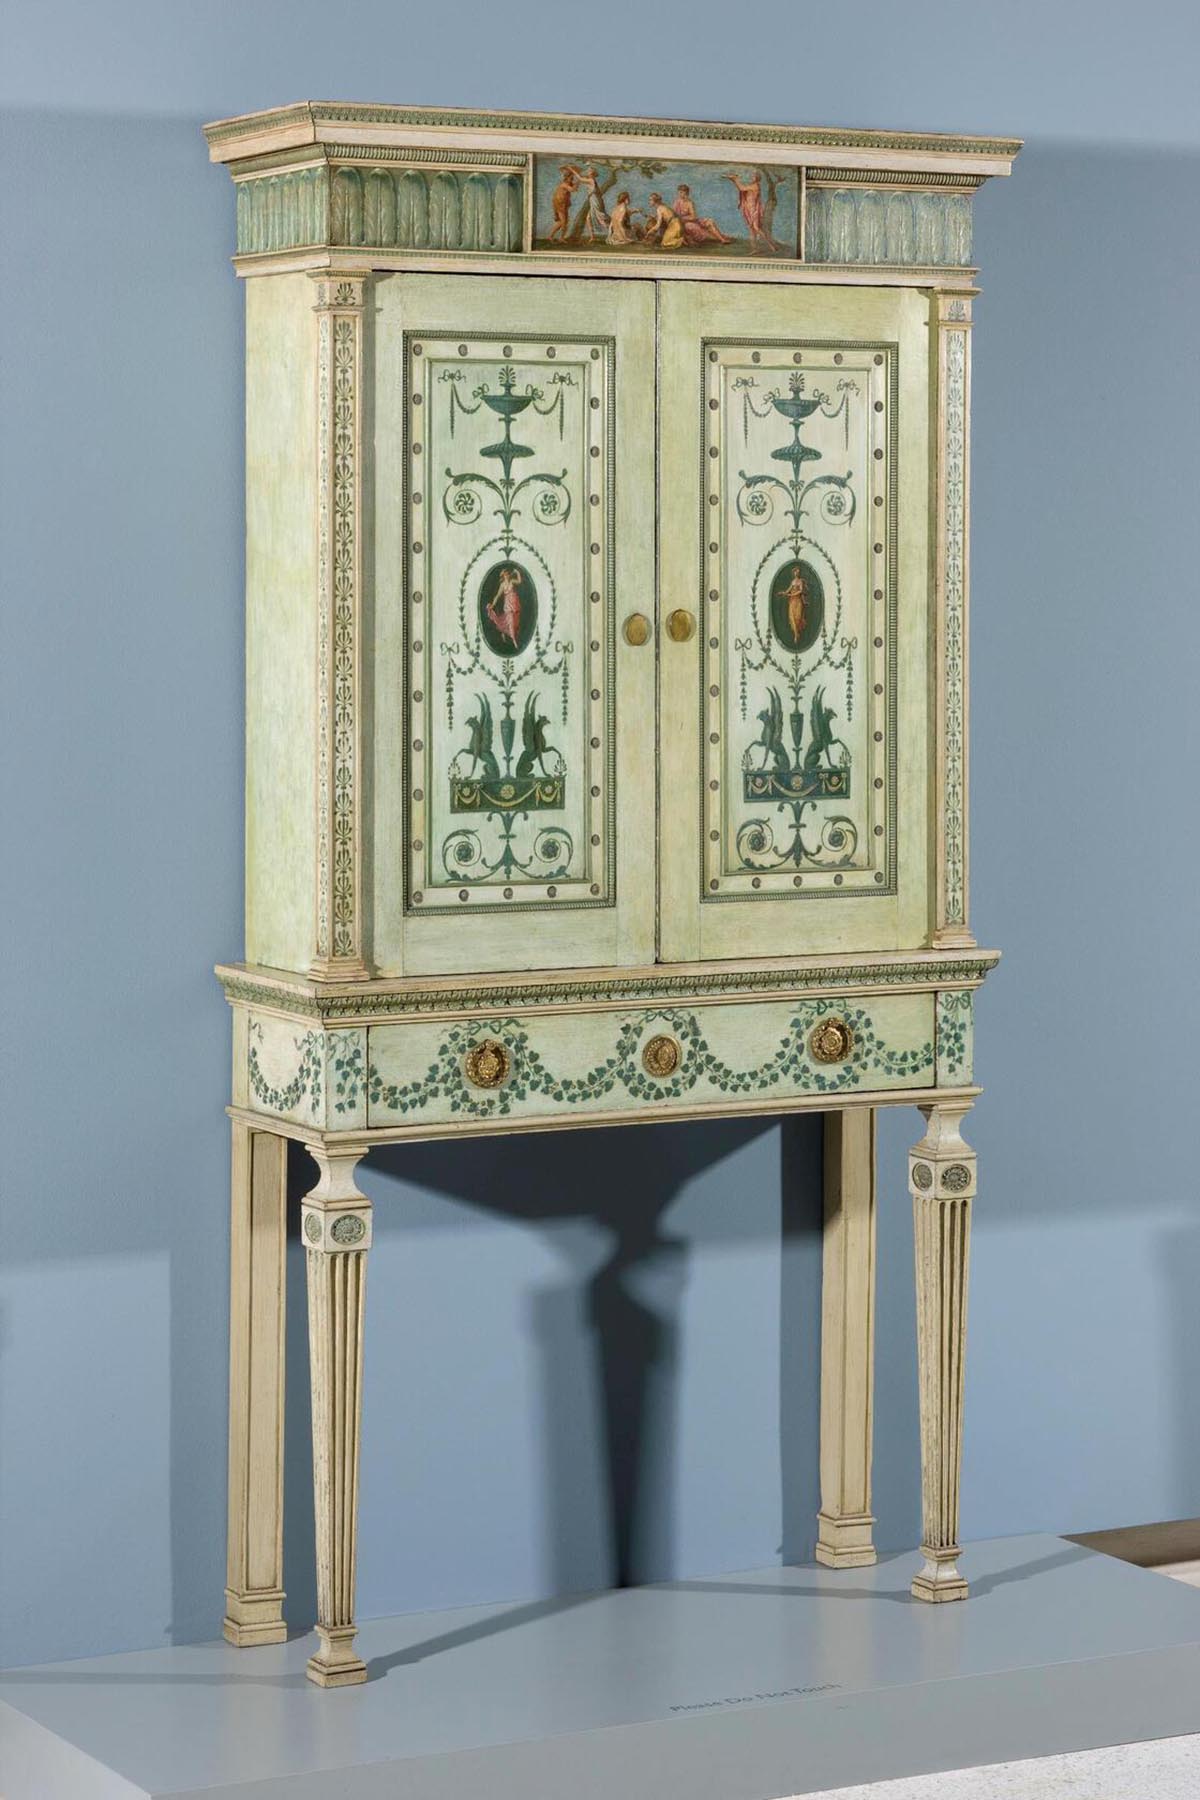 A wooden bookcase painted light green with additional decorations on the surface